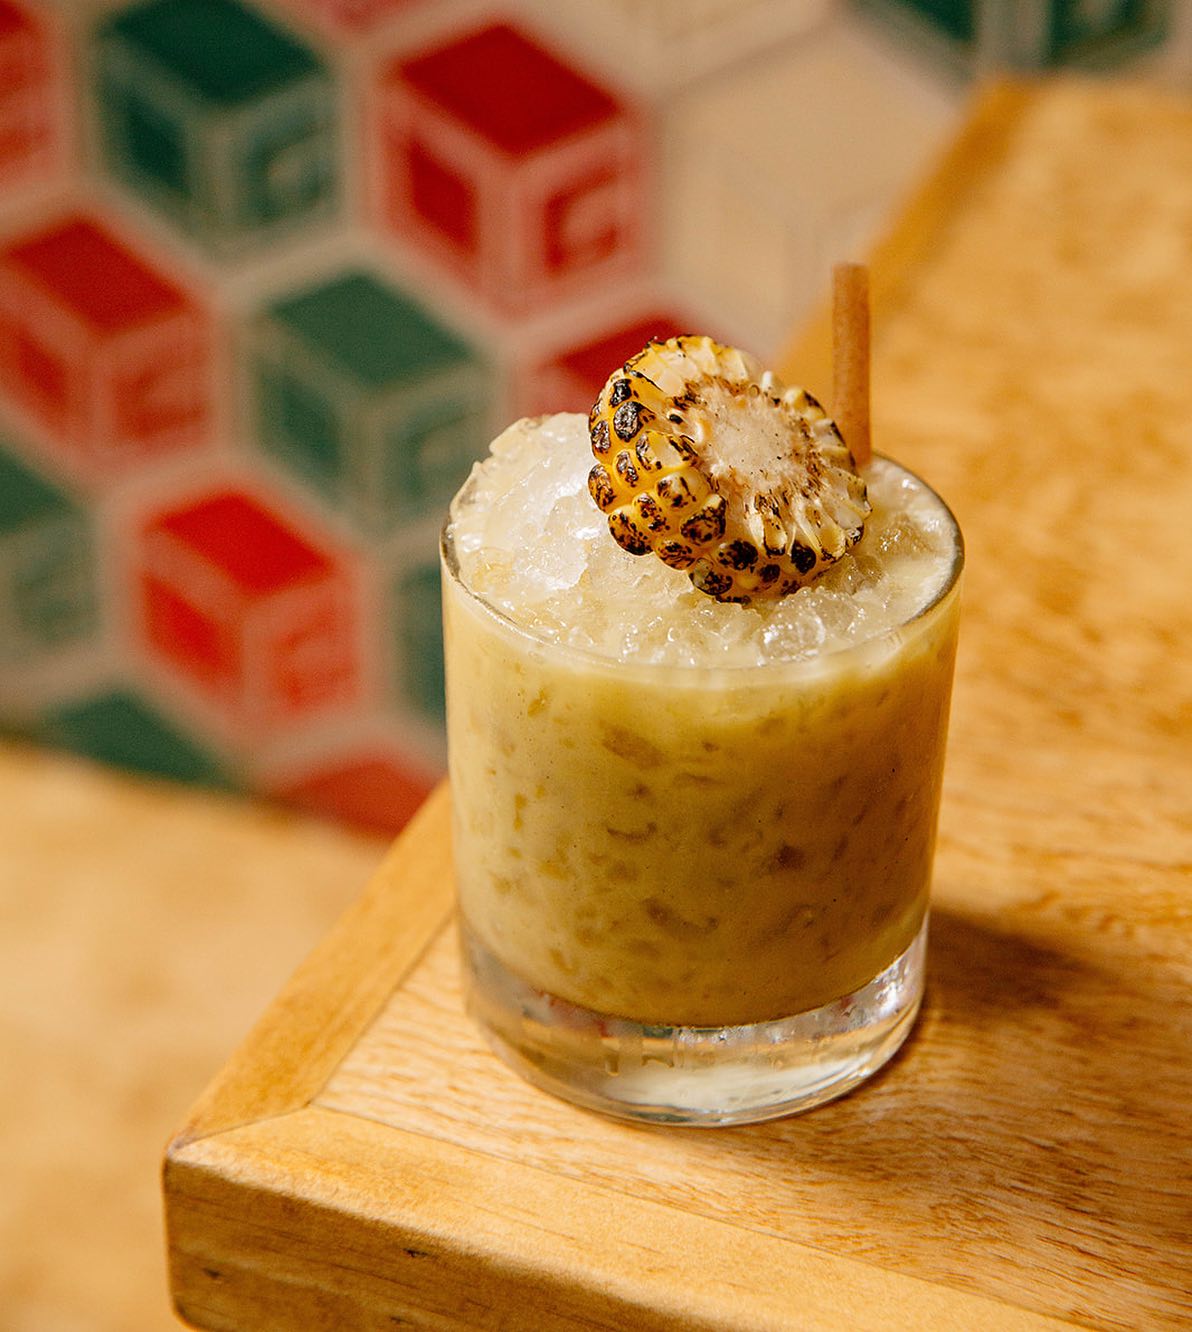 A tumbler filled with crushed ice, a beige liquid, and garnished with a charred wheel of corn and a straw. The drink is sitting on a wooden table.